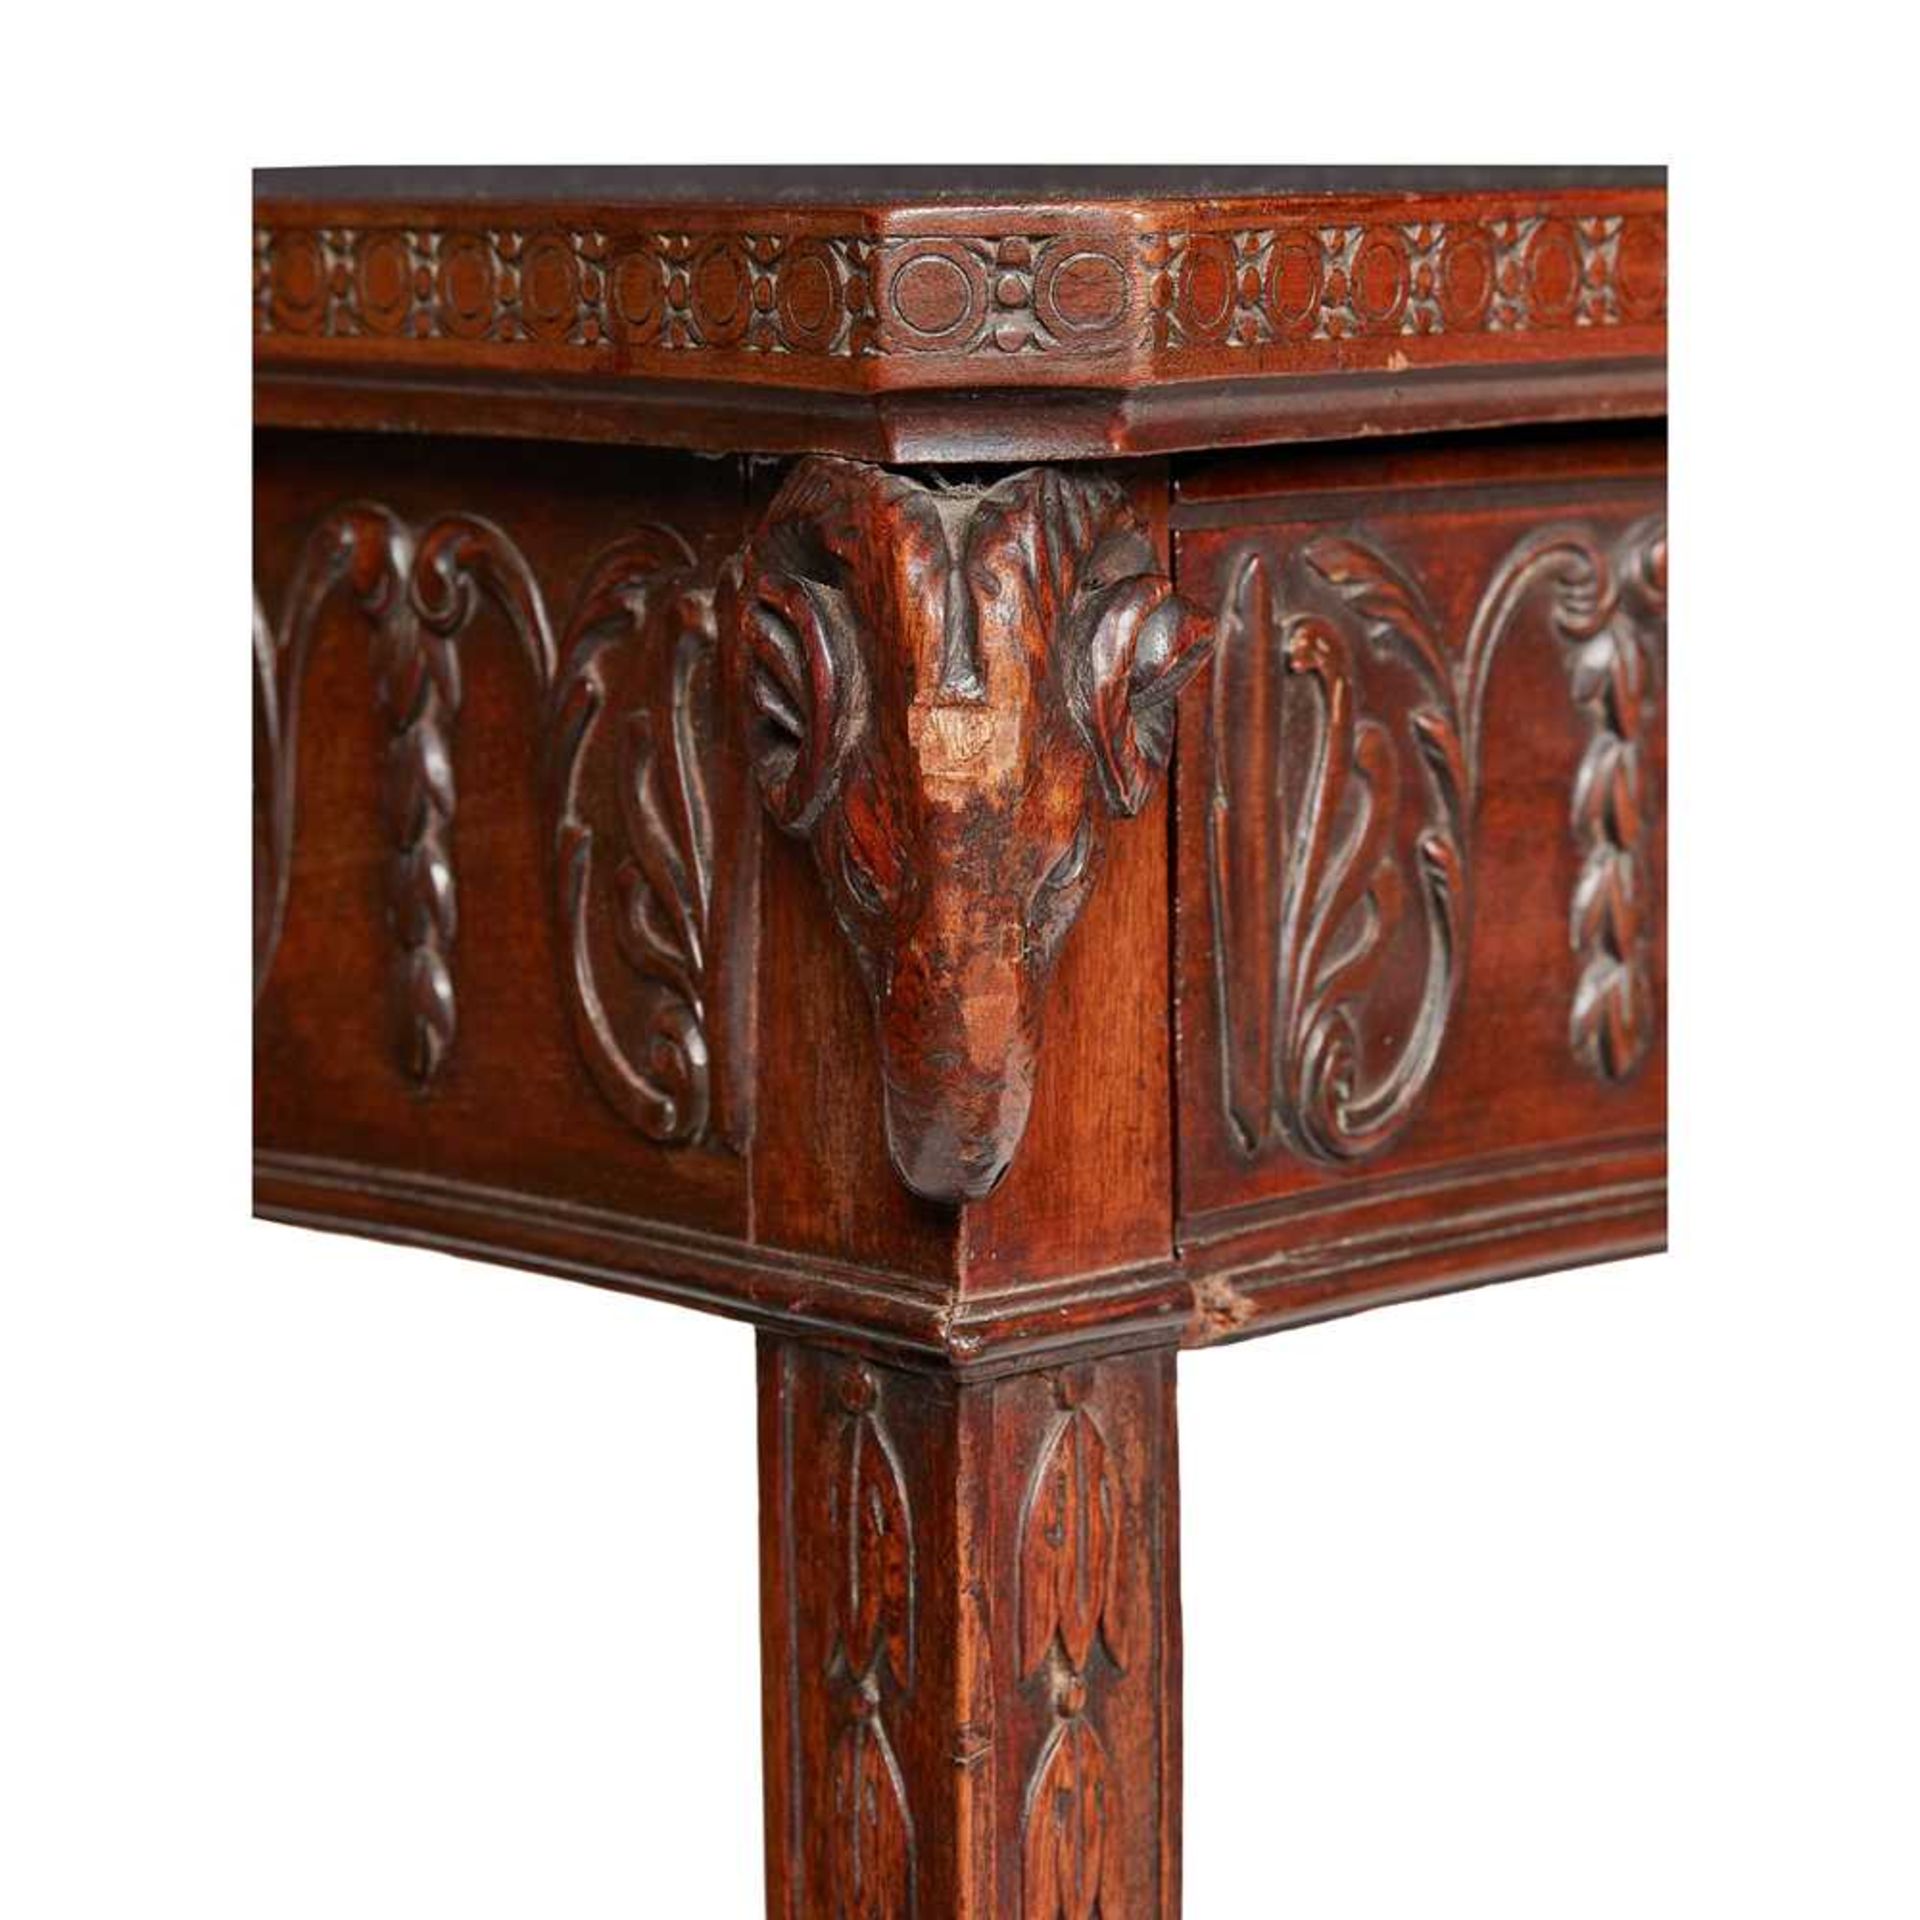 GEORGIAN STYLE MAHOGANY SERPENTINE SERVING TABLE, IN THE MANNER OF ROBERT ADAM 20TH CENTURY - Image 2 of 2